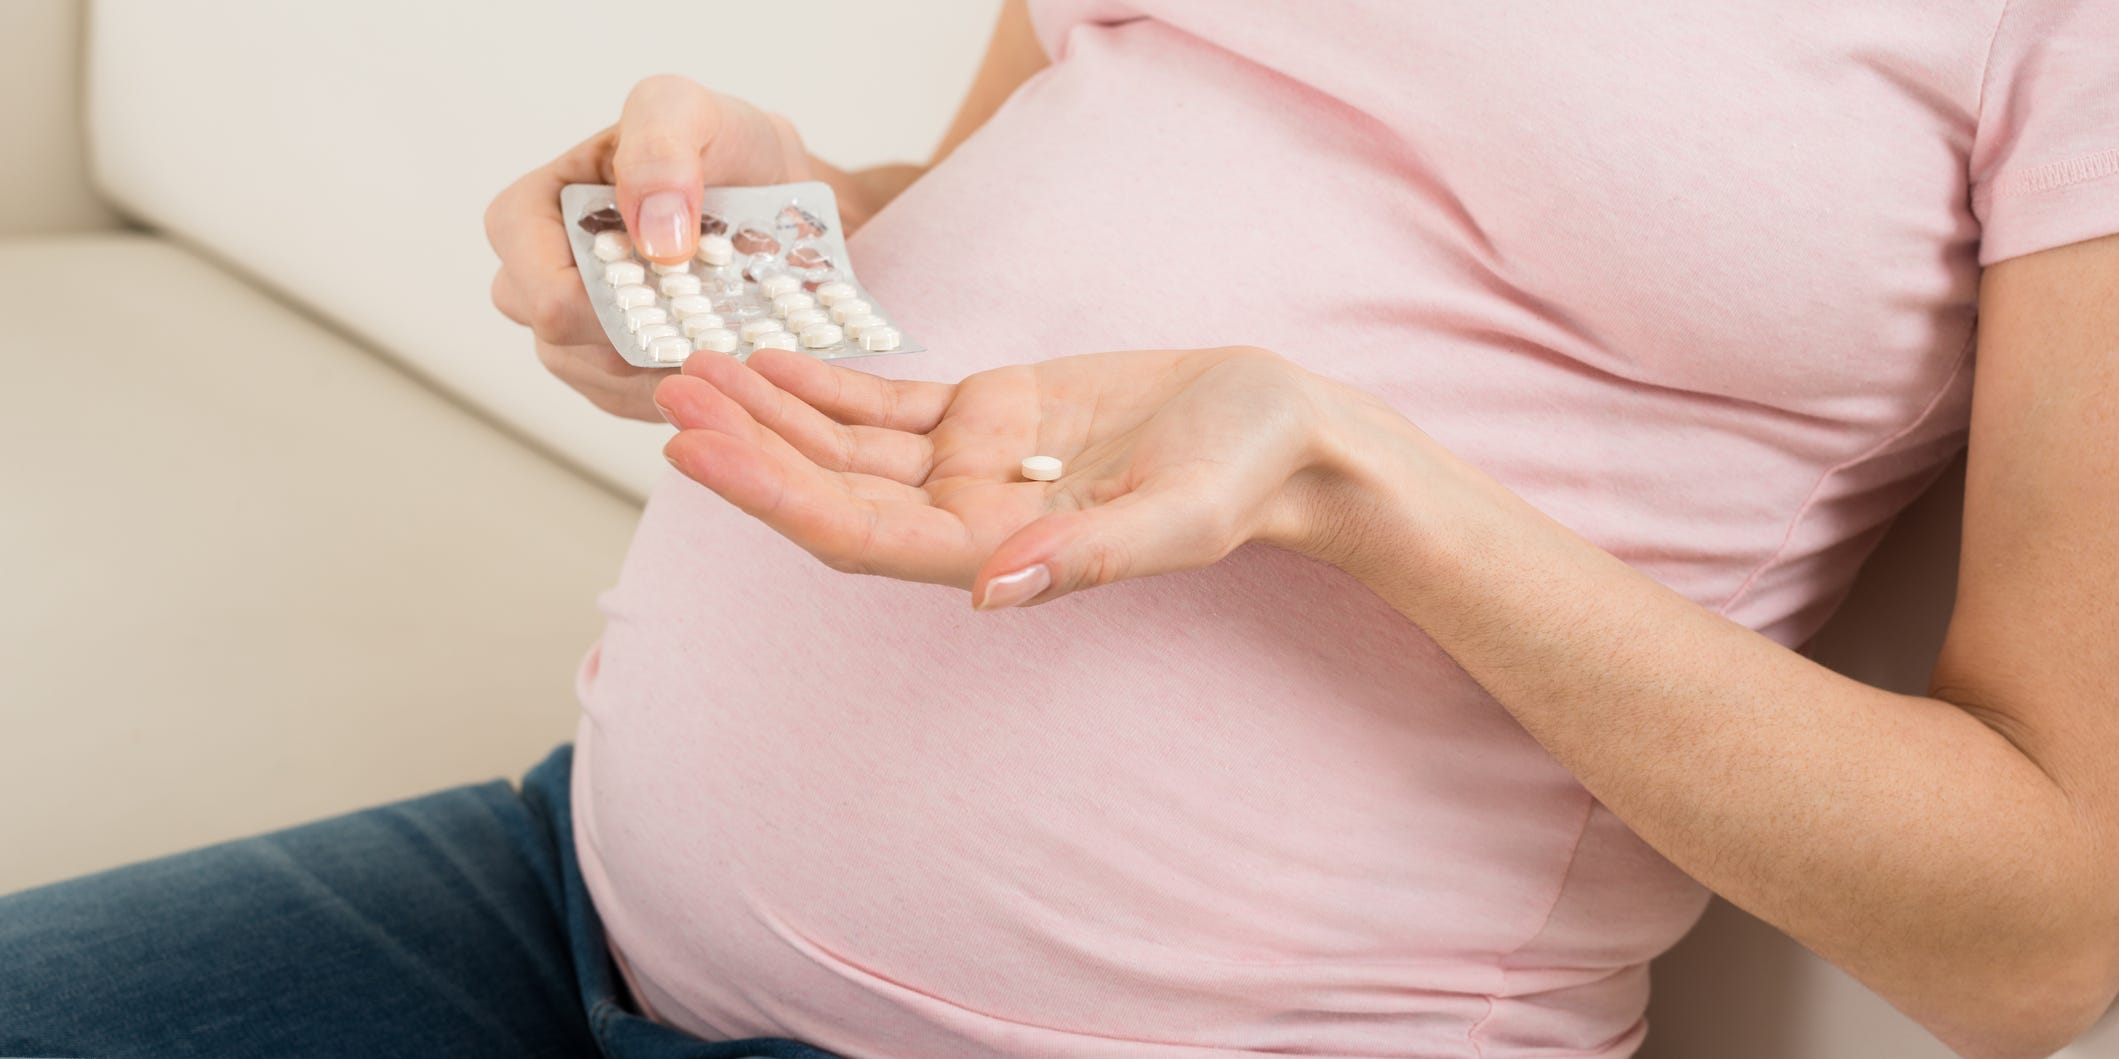 The torso and belly of pregnant woman is pictured. In one hand she holds a pill, in the other she holds the pill package. Over-the-counter medicine like Tylenol.